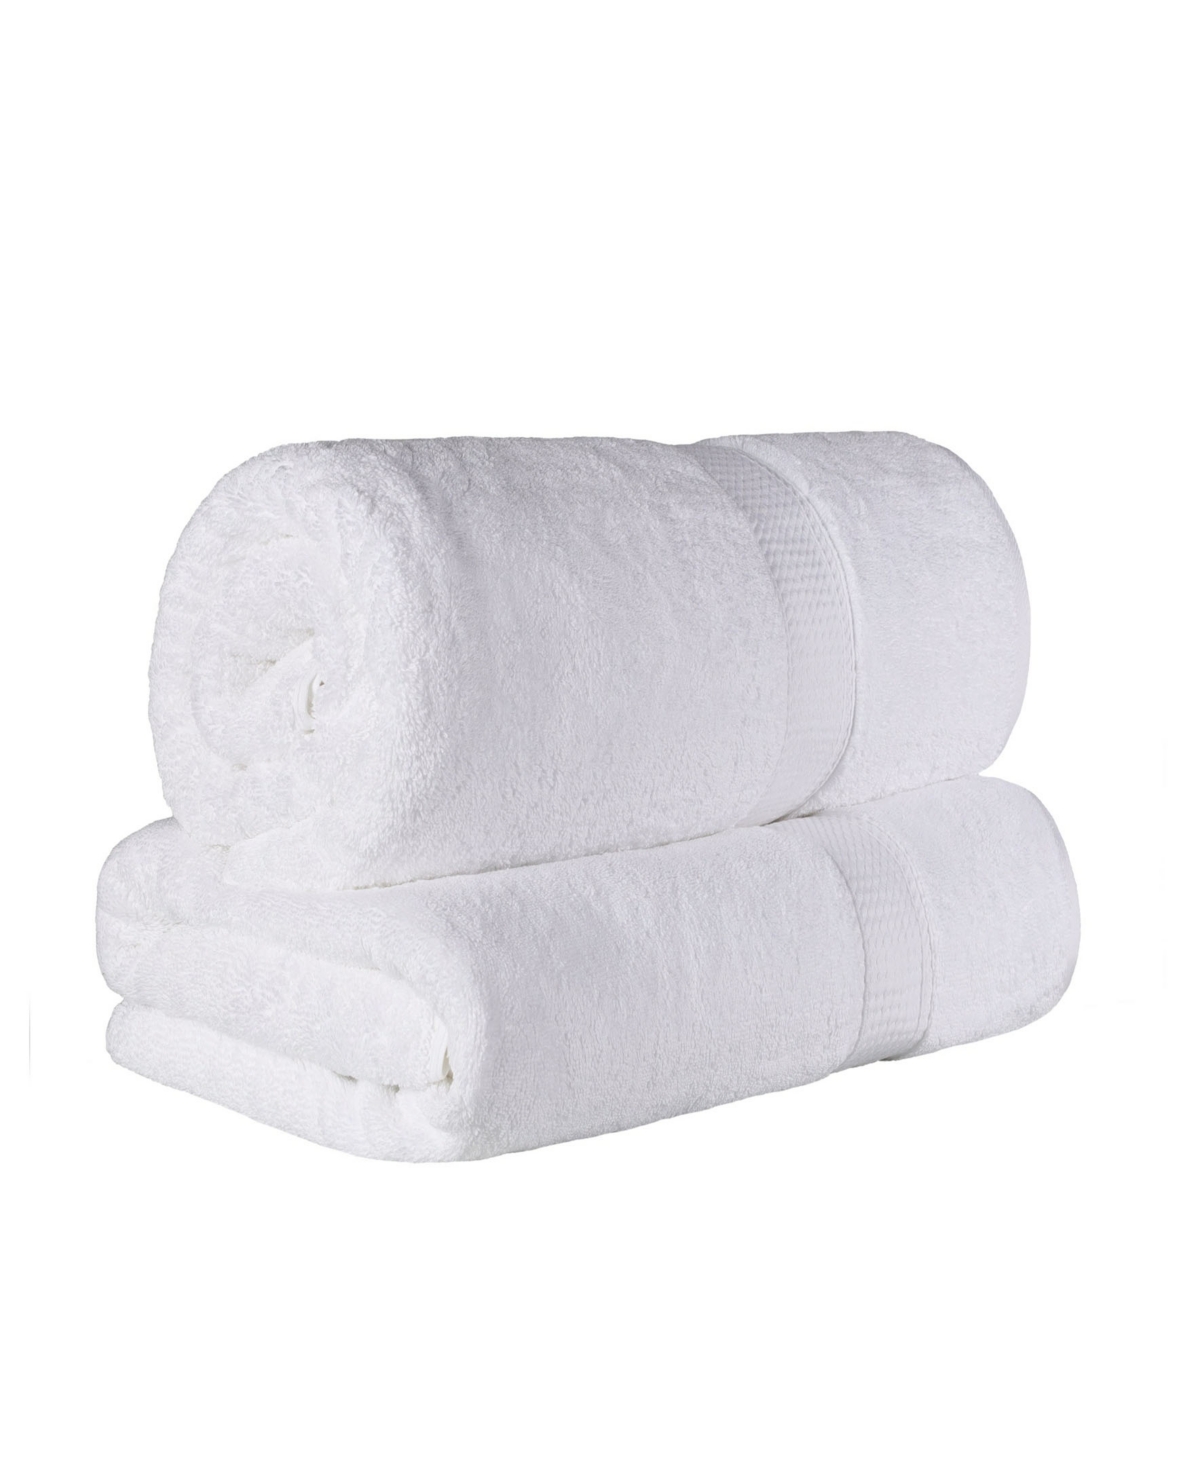 Superior Highly Absorbent 2 Piece Egyptian Cotton Ultra Plush Solid Bath Sheet Set Bedding In White